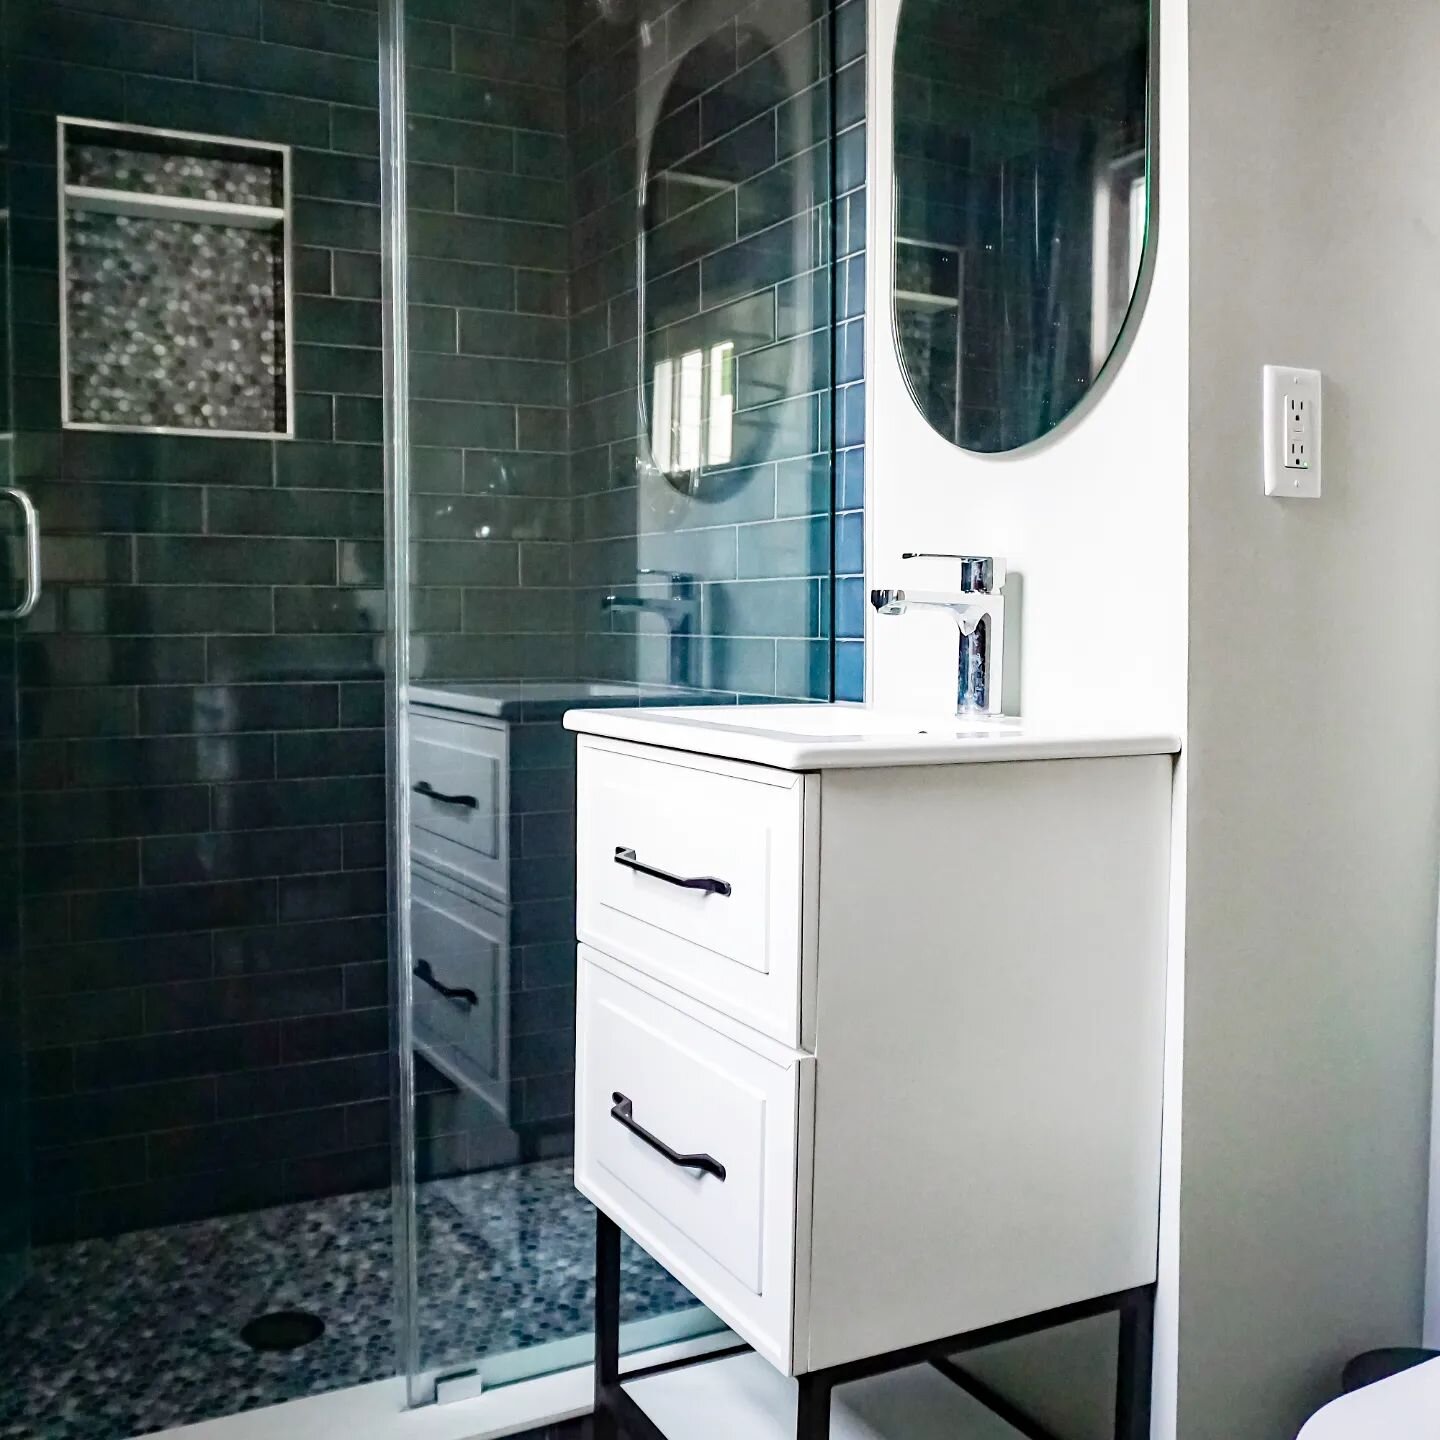 Peaking in at this little beauty - now tucked away from the remodeled kitchen and no longer a bathroom right off the dining room. This little space fits perfectly in this KCK shirtwaist home. 

#astoriadesignbuild #bathroomdesign #kcwomenowned #kcdes